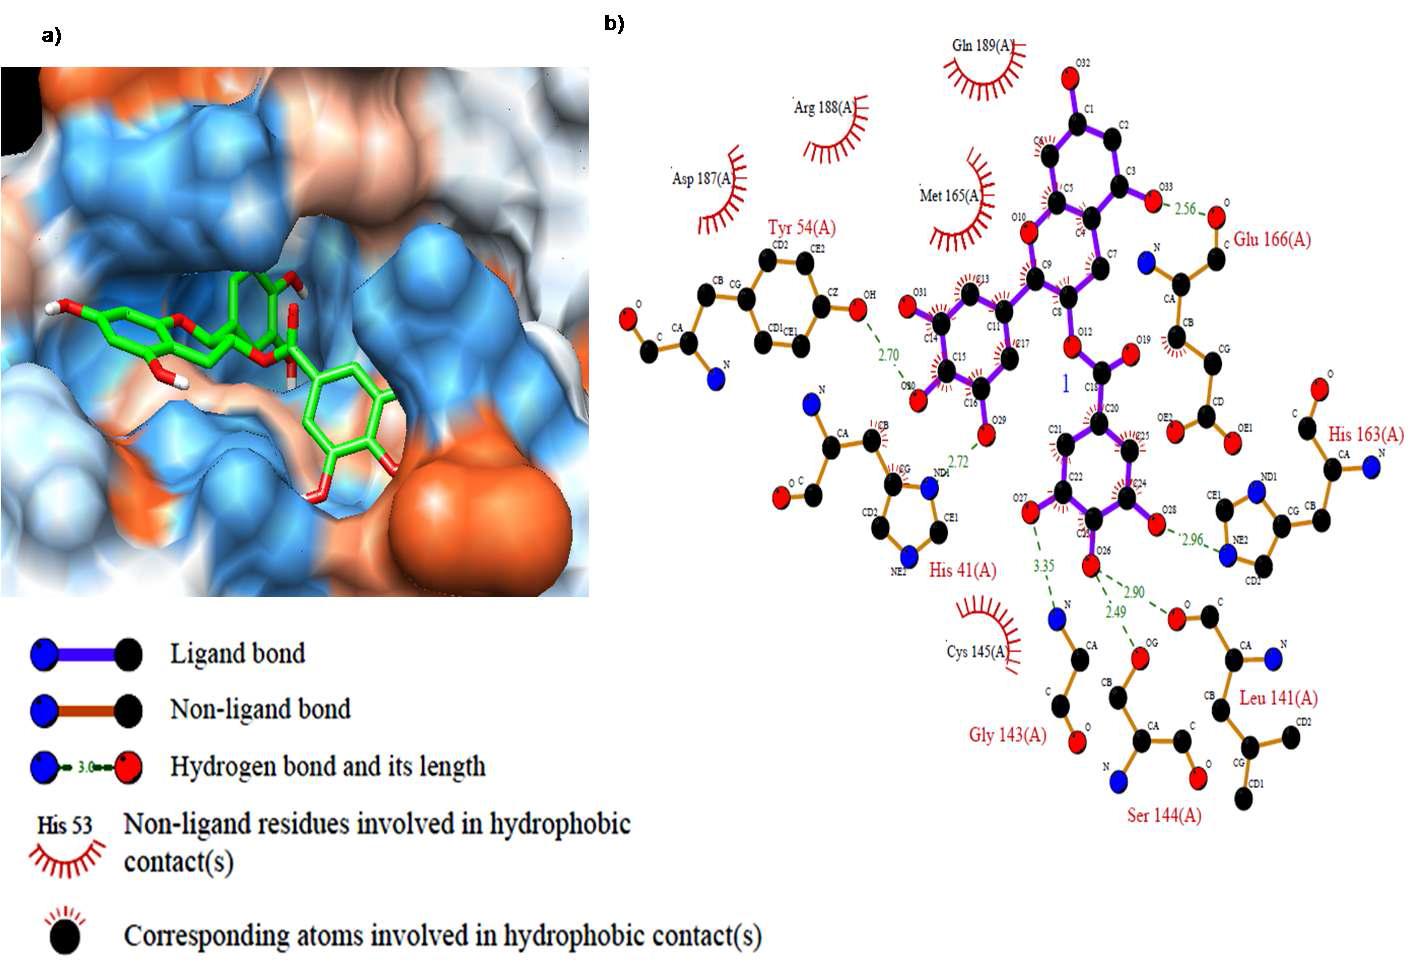 Computational docking and hydrophobic and hydrogen bond interactions of GCG with amino acid residues in the active site of 3CLpro.